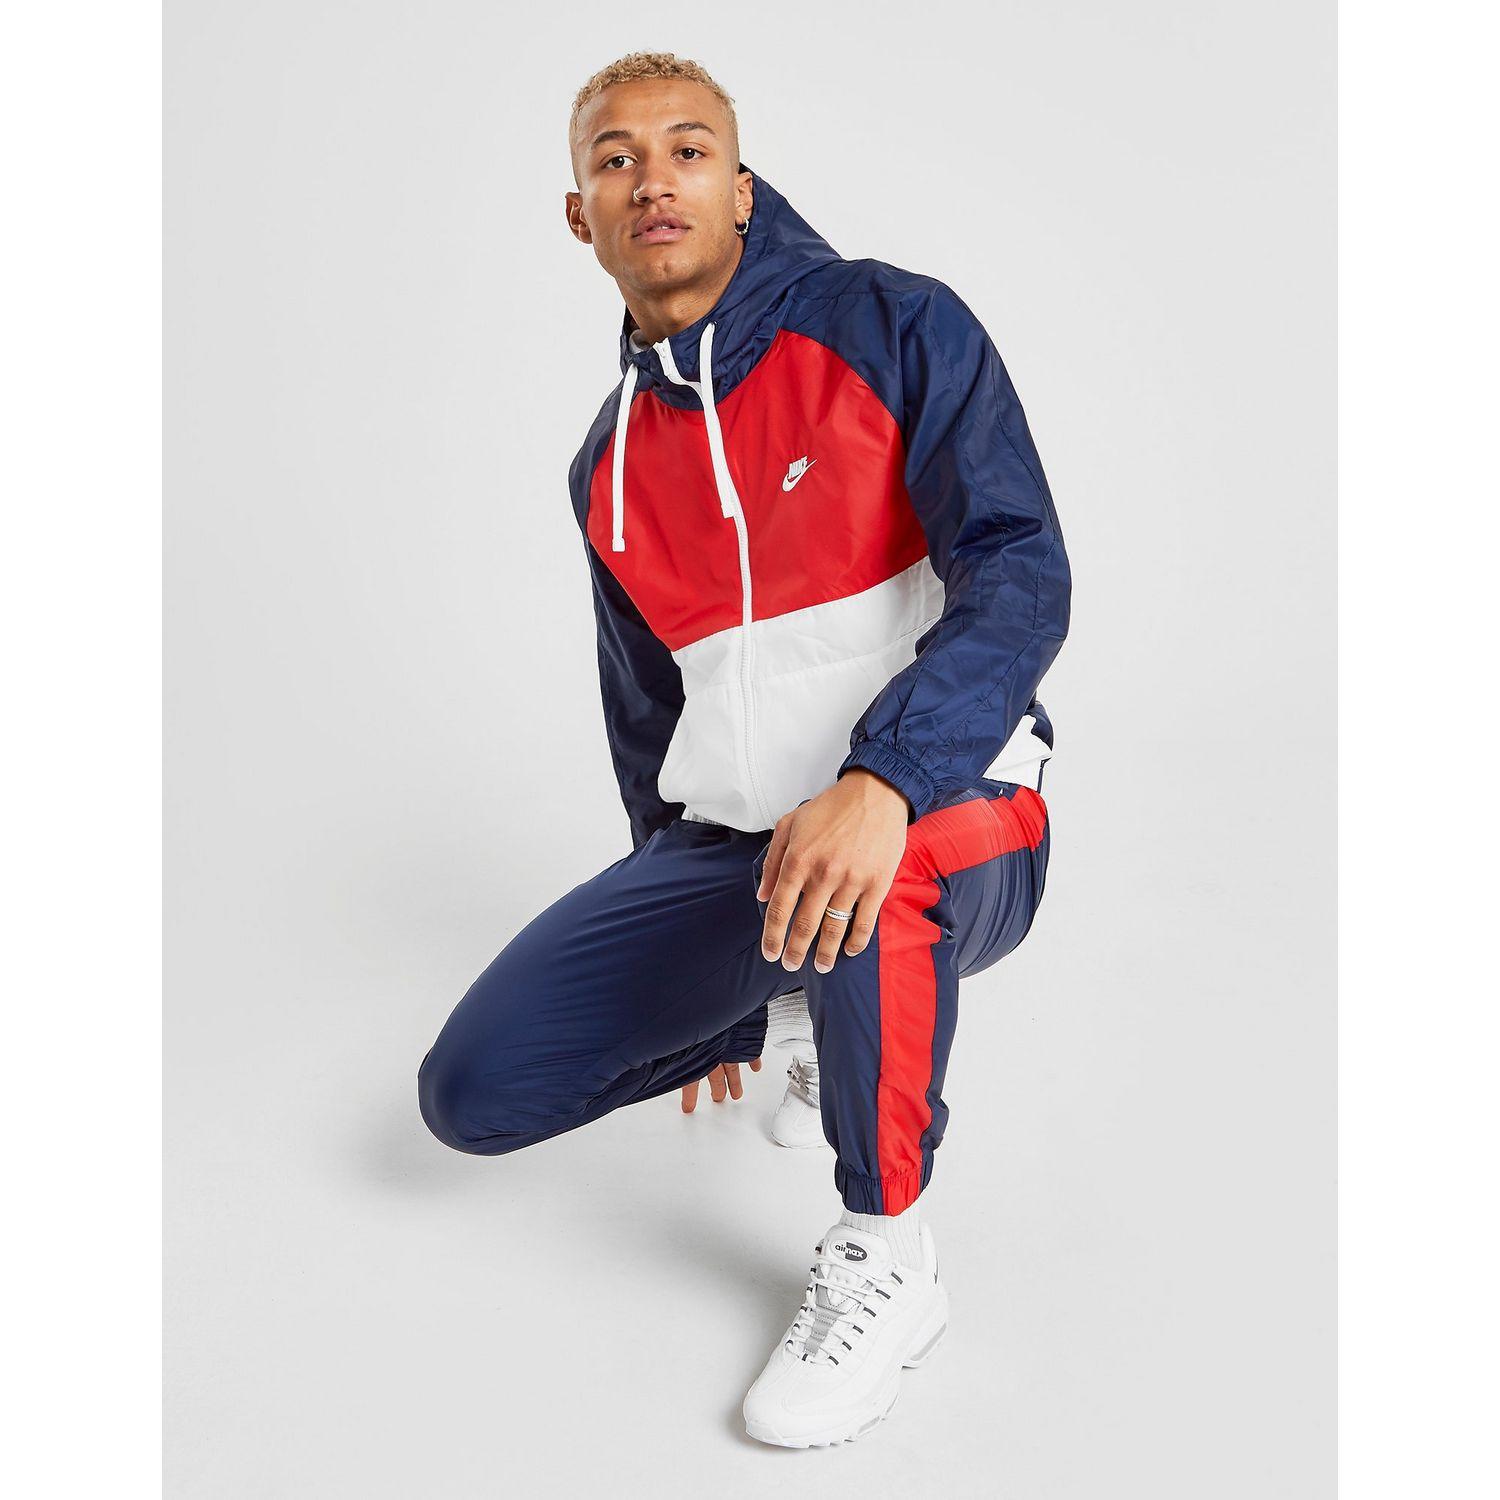 nike black and blue tracksuit